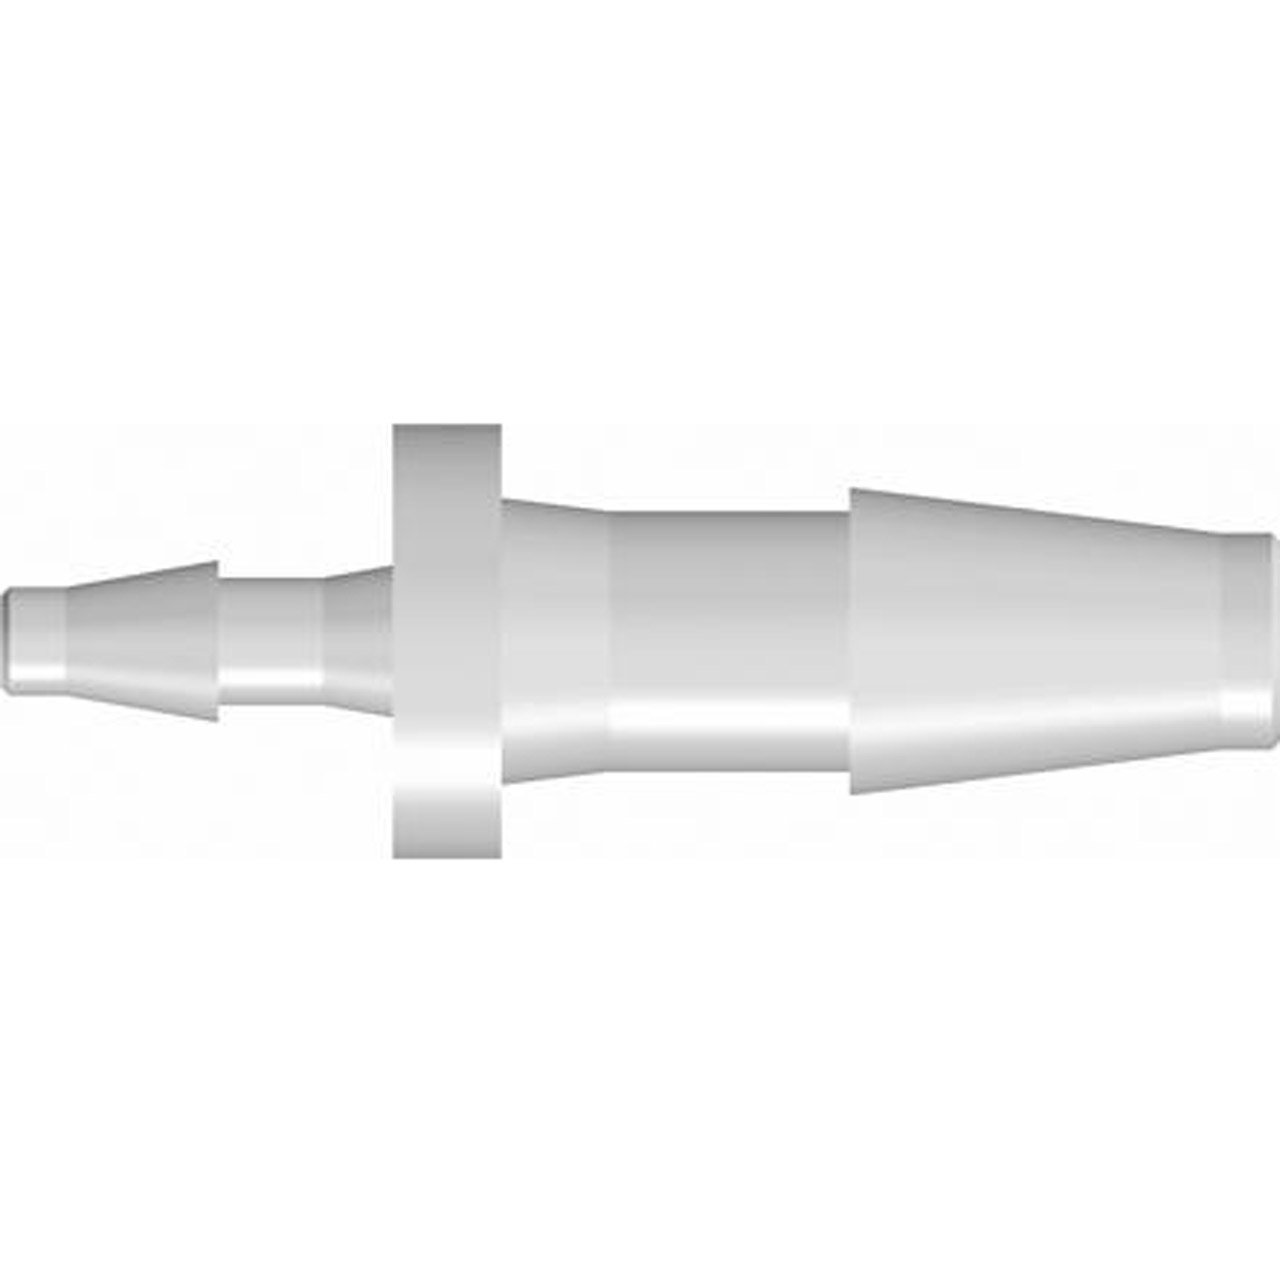 Tube reducer connector 1/4 x 1/8